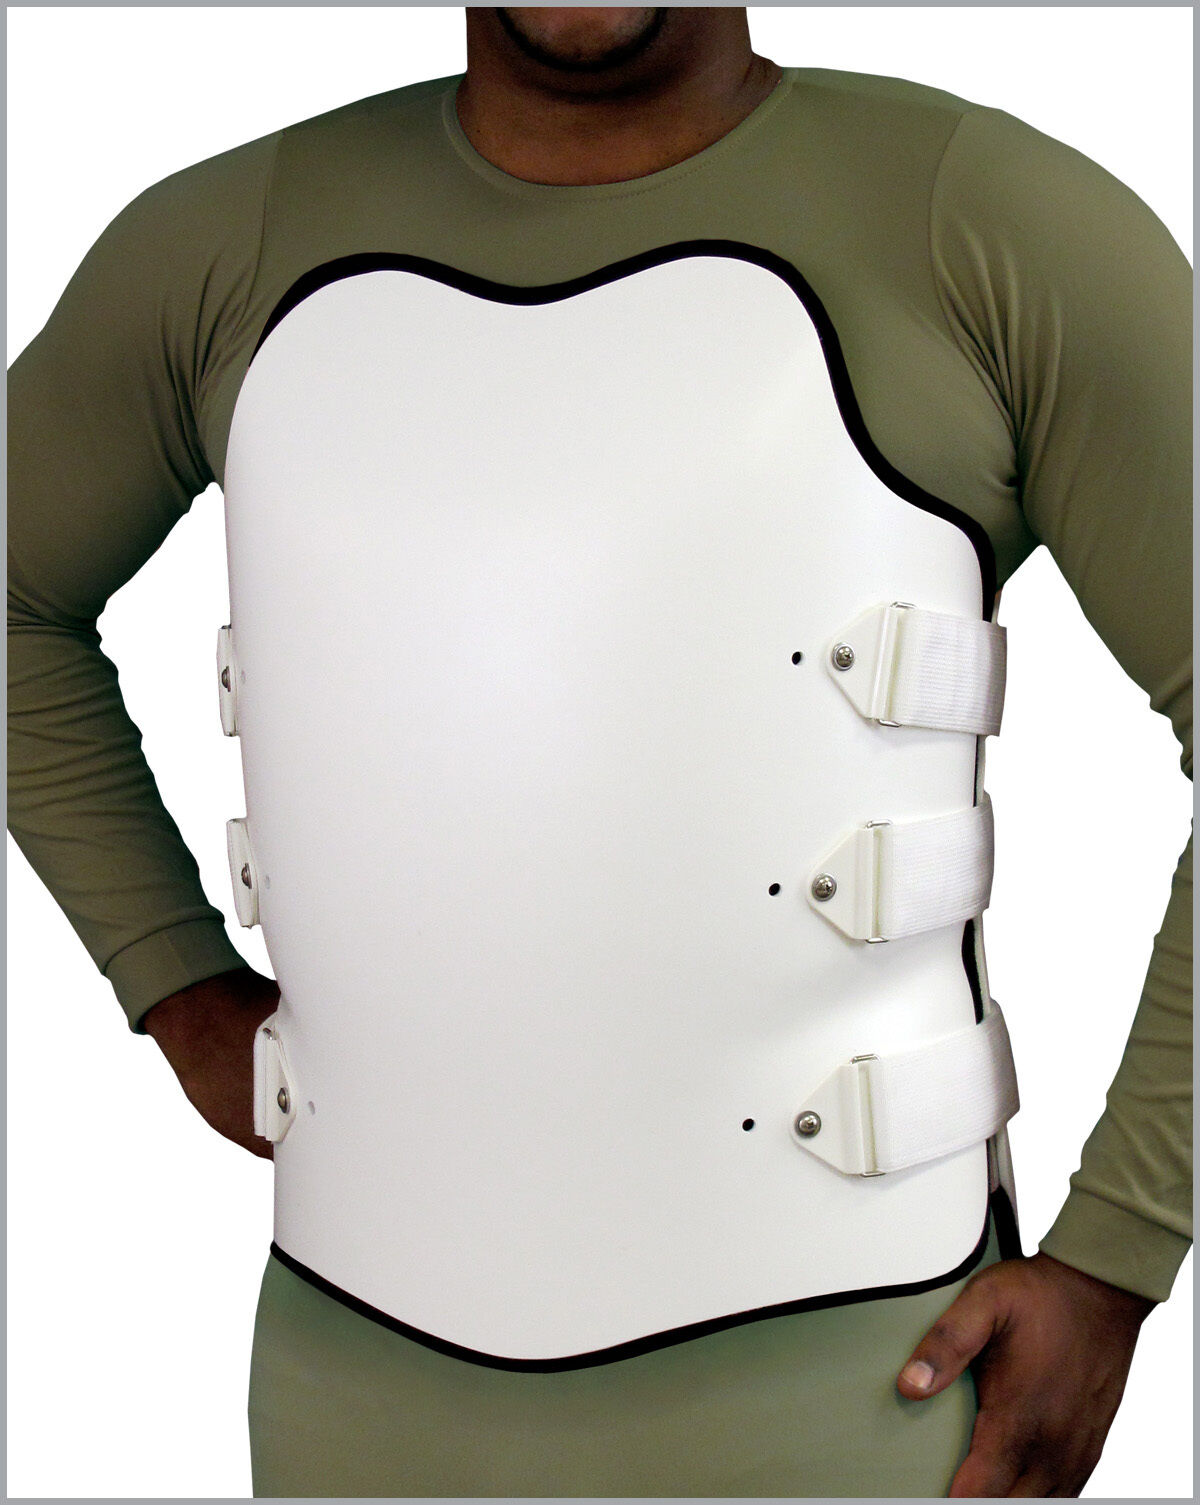 https://spinaltech.com/uploaded/imager/productpictures/s-t-o-p-orthosis/14453/STOP_2_Male-Front_d3b18c70418b1986b200783e278cddd2.jpg